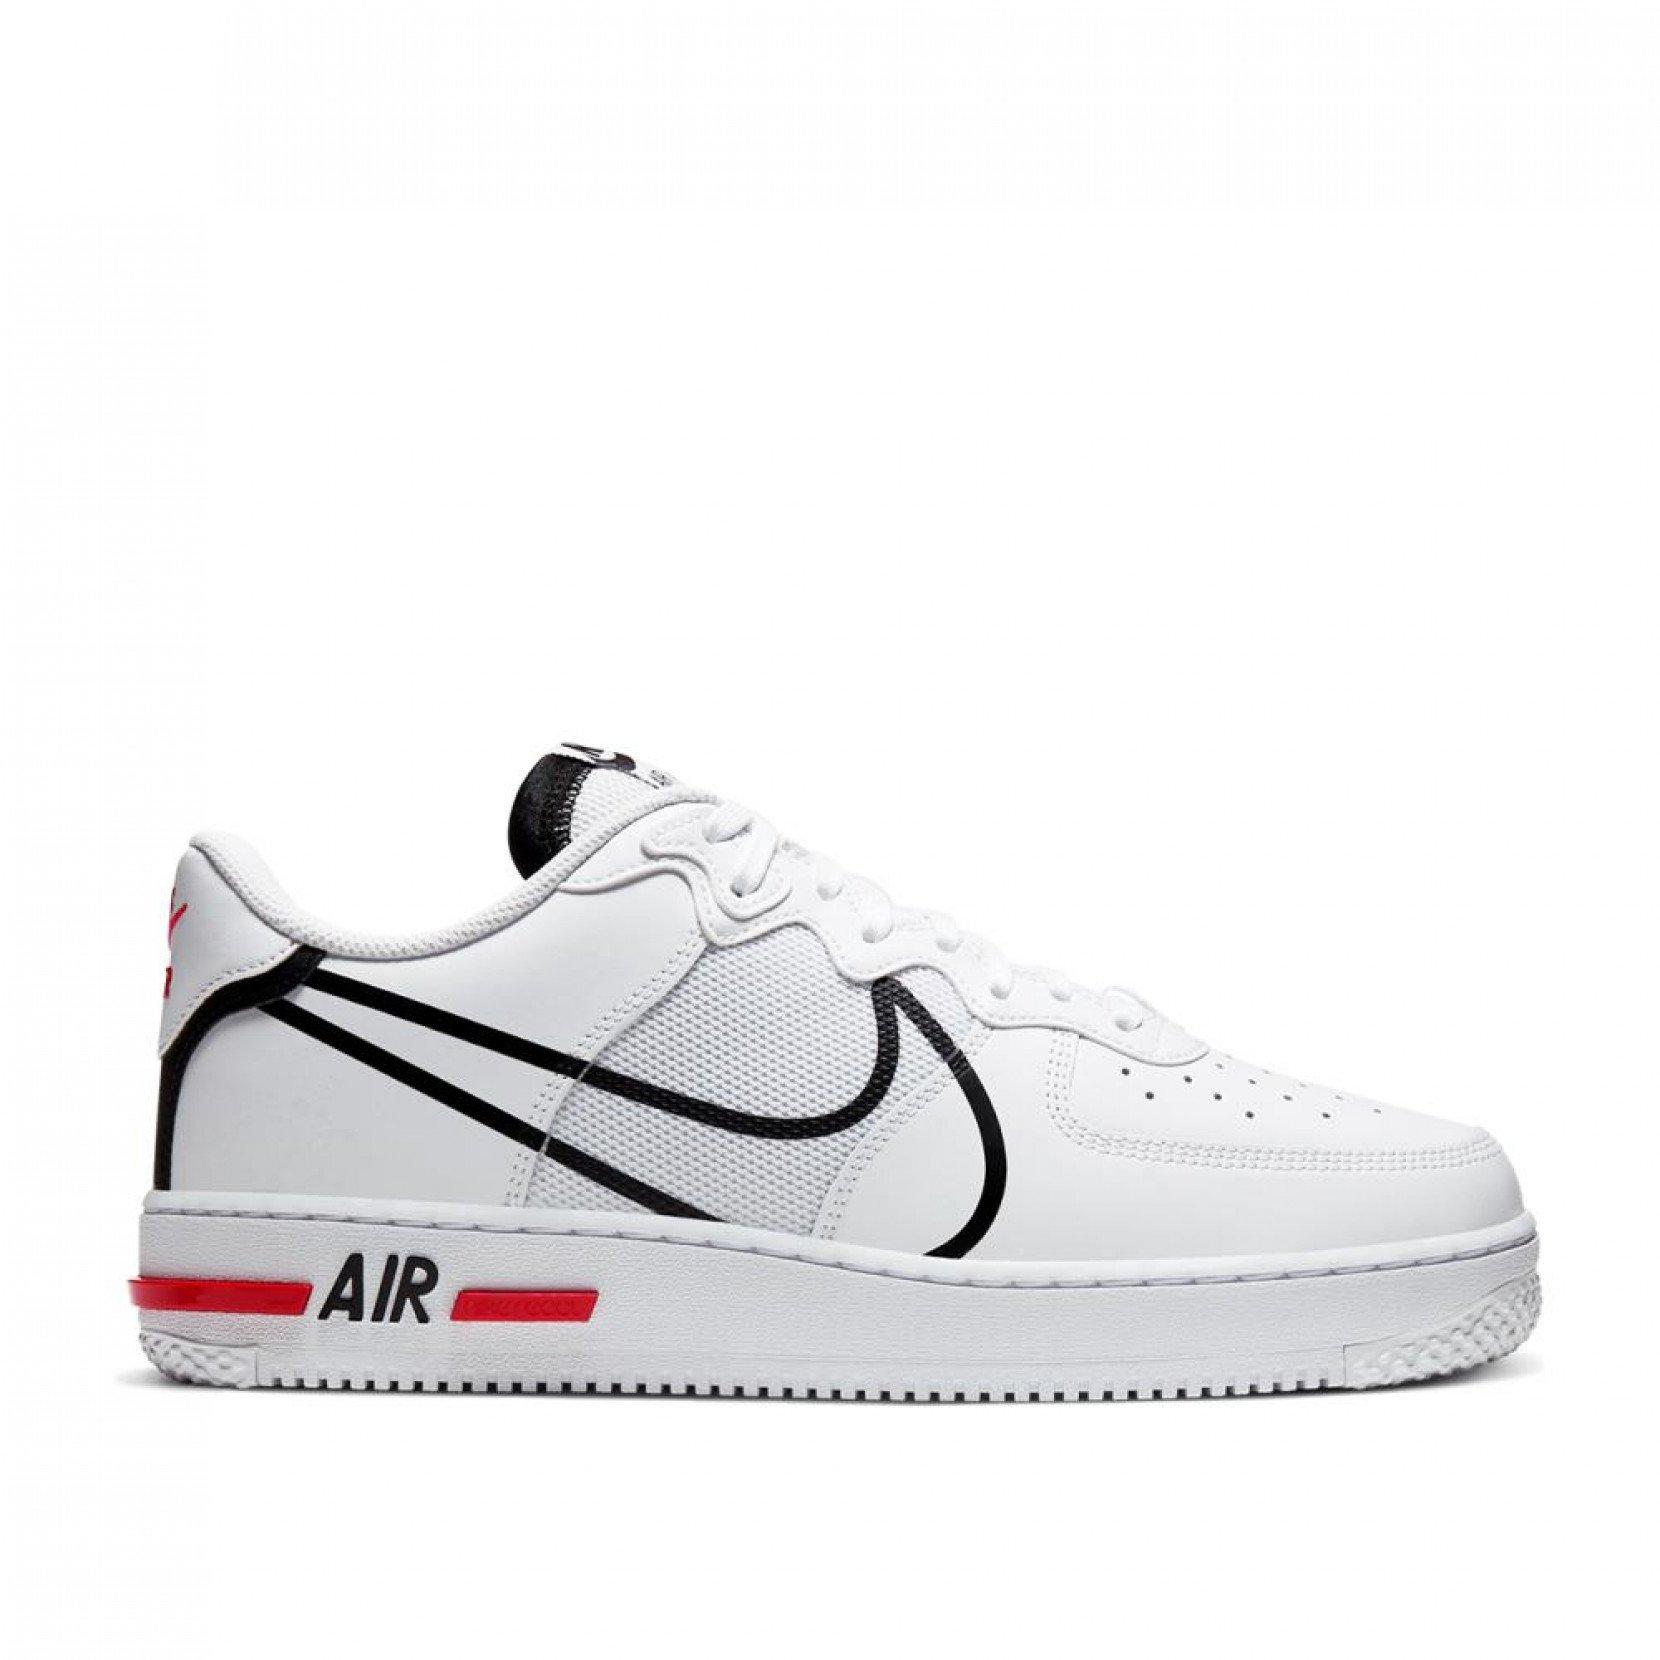 Nike Air Force 1 React Shoe in White/Black (White) for Men - Lyst